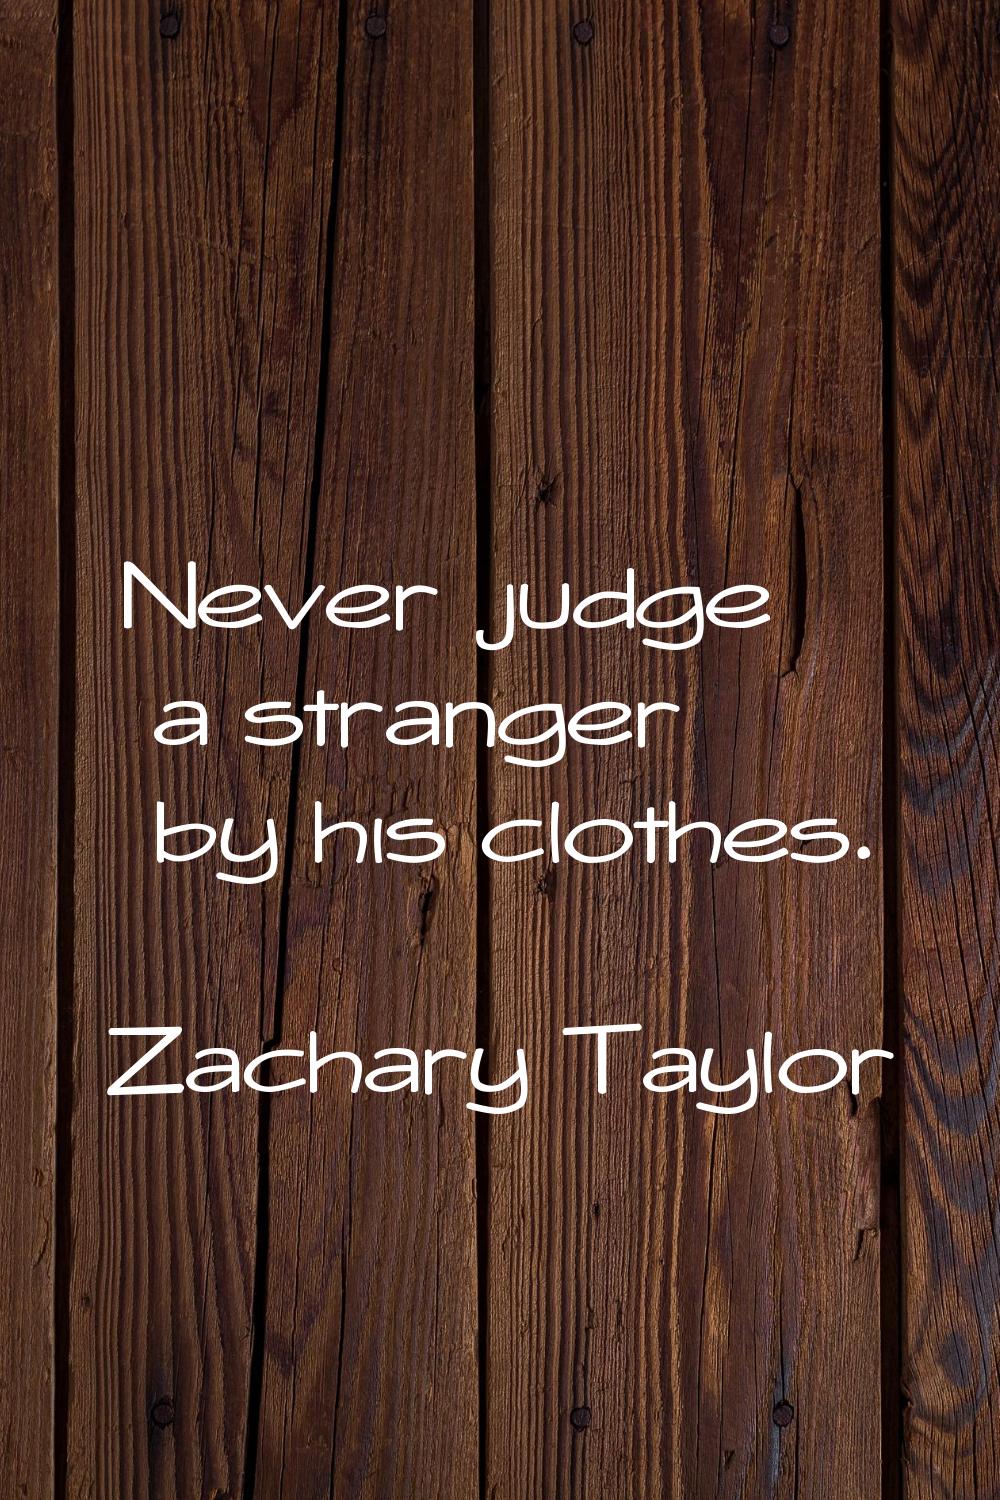 Never judge a stranger by his clothes.